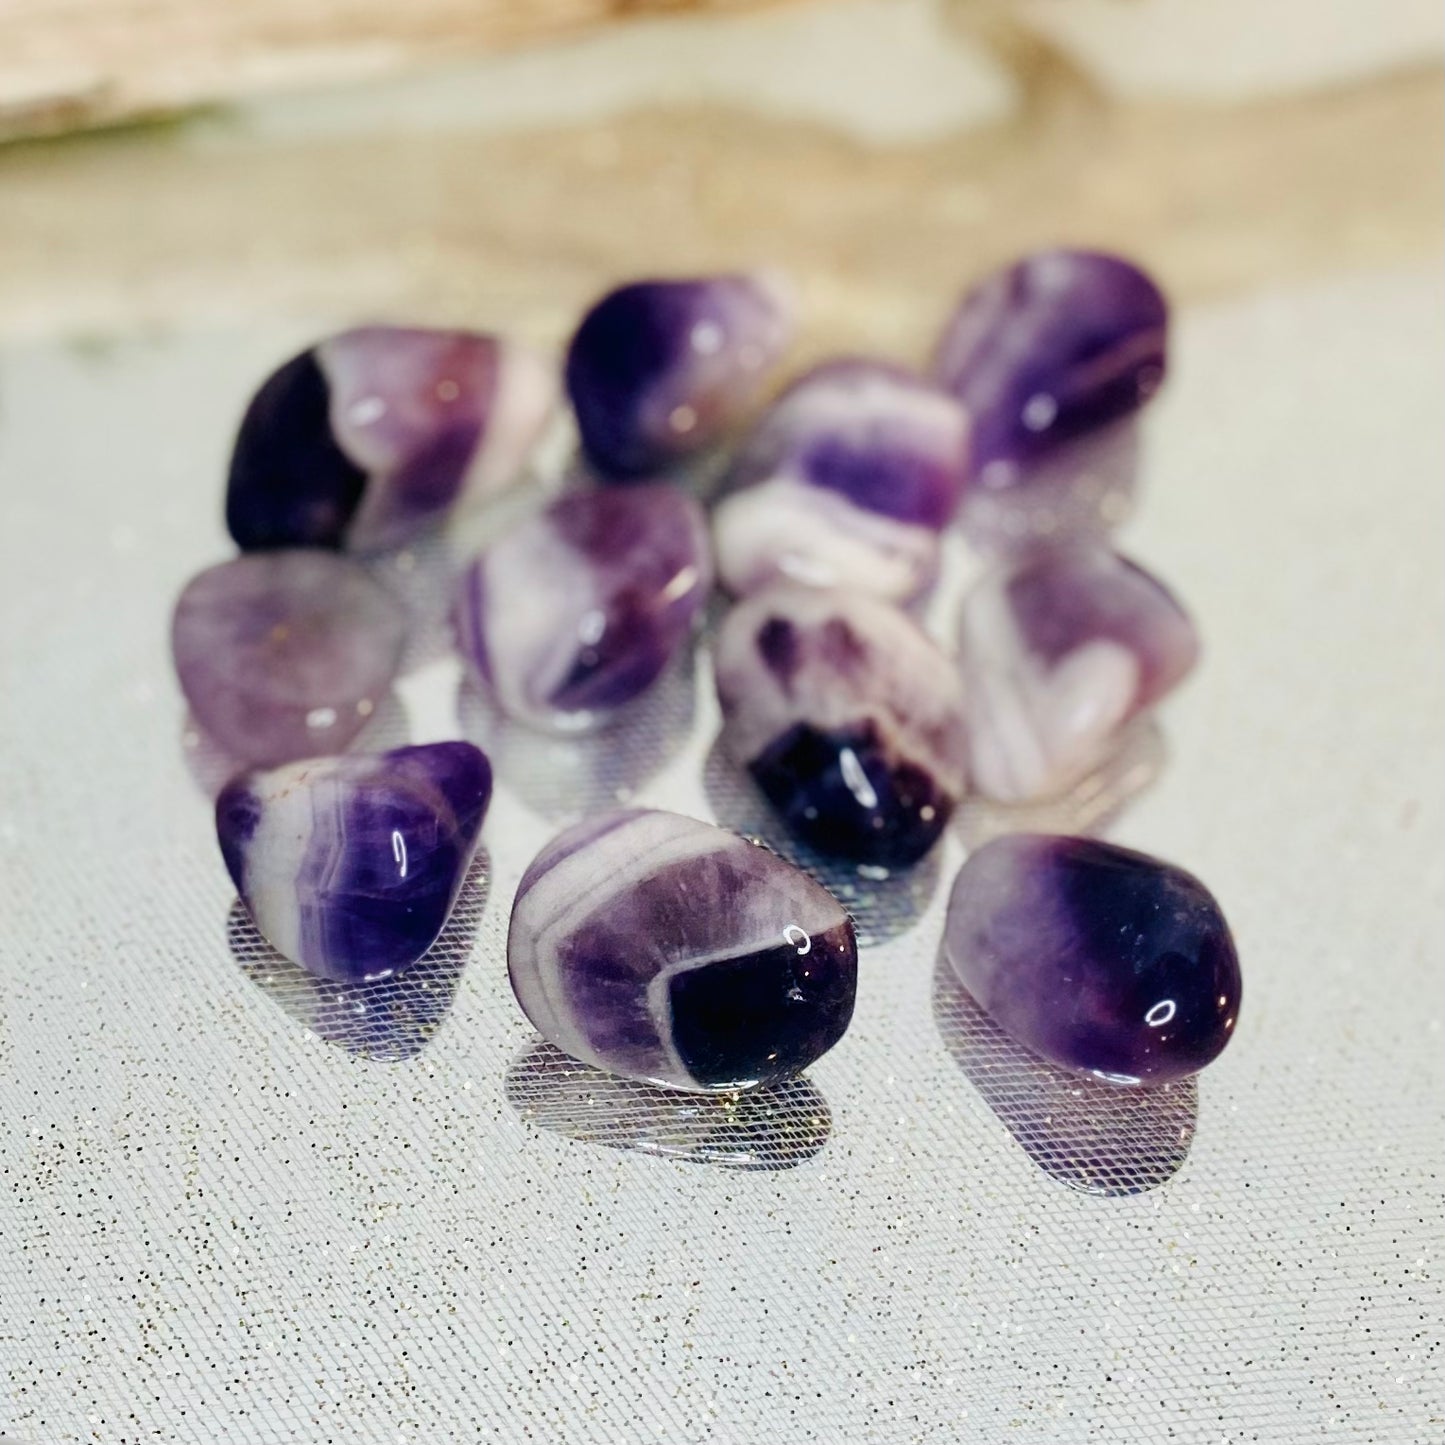 Banded Amethyst large tumbled stones from South Africa